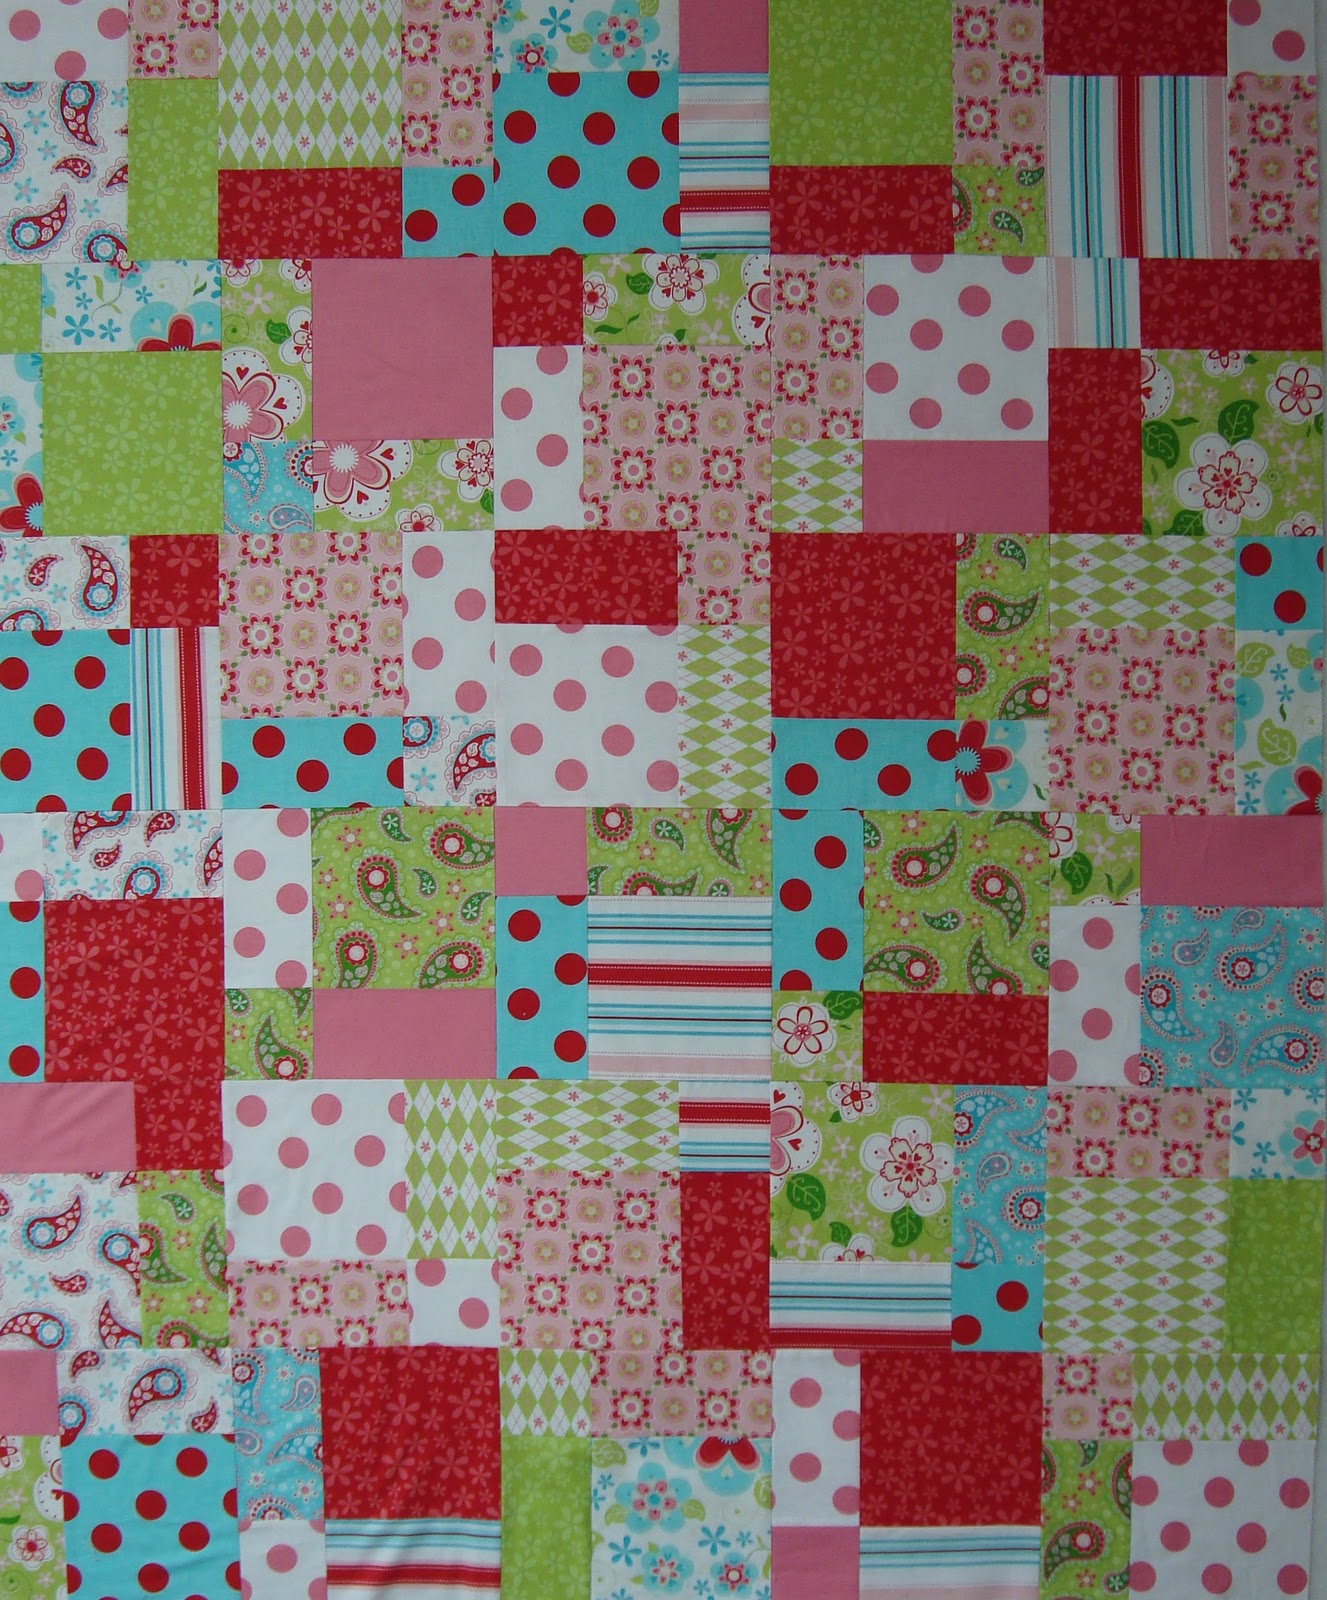 mary-s-quilts-easy-bake-by-cluck-cluck-sew